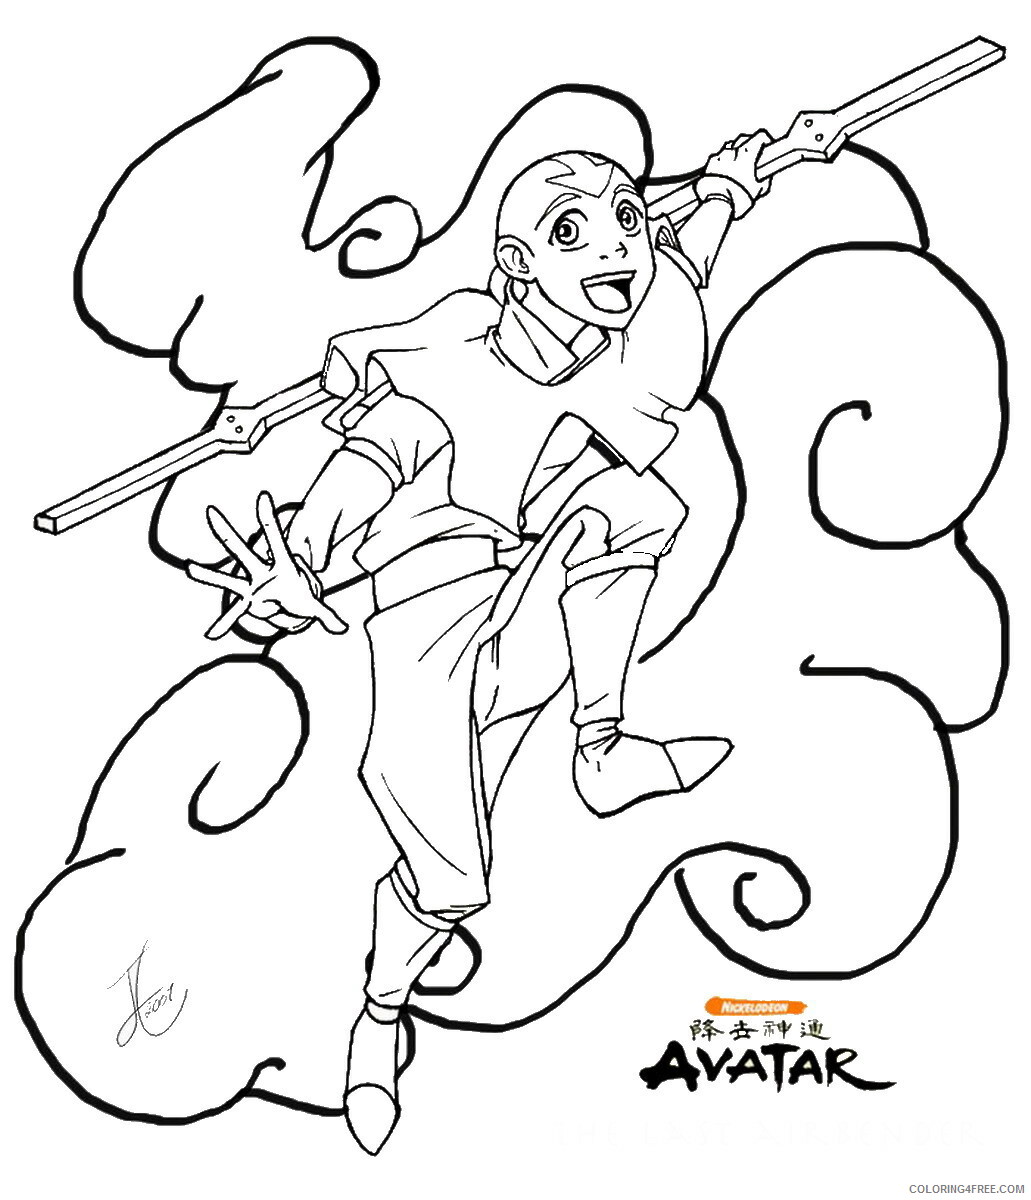 Avatar the Last Airbender Coloring Pages TV Film avatar_cl157 Printable 2020 00310 Coloring4free